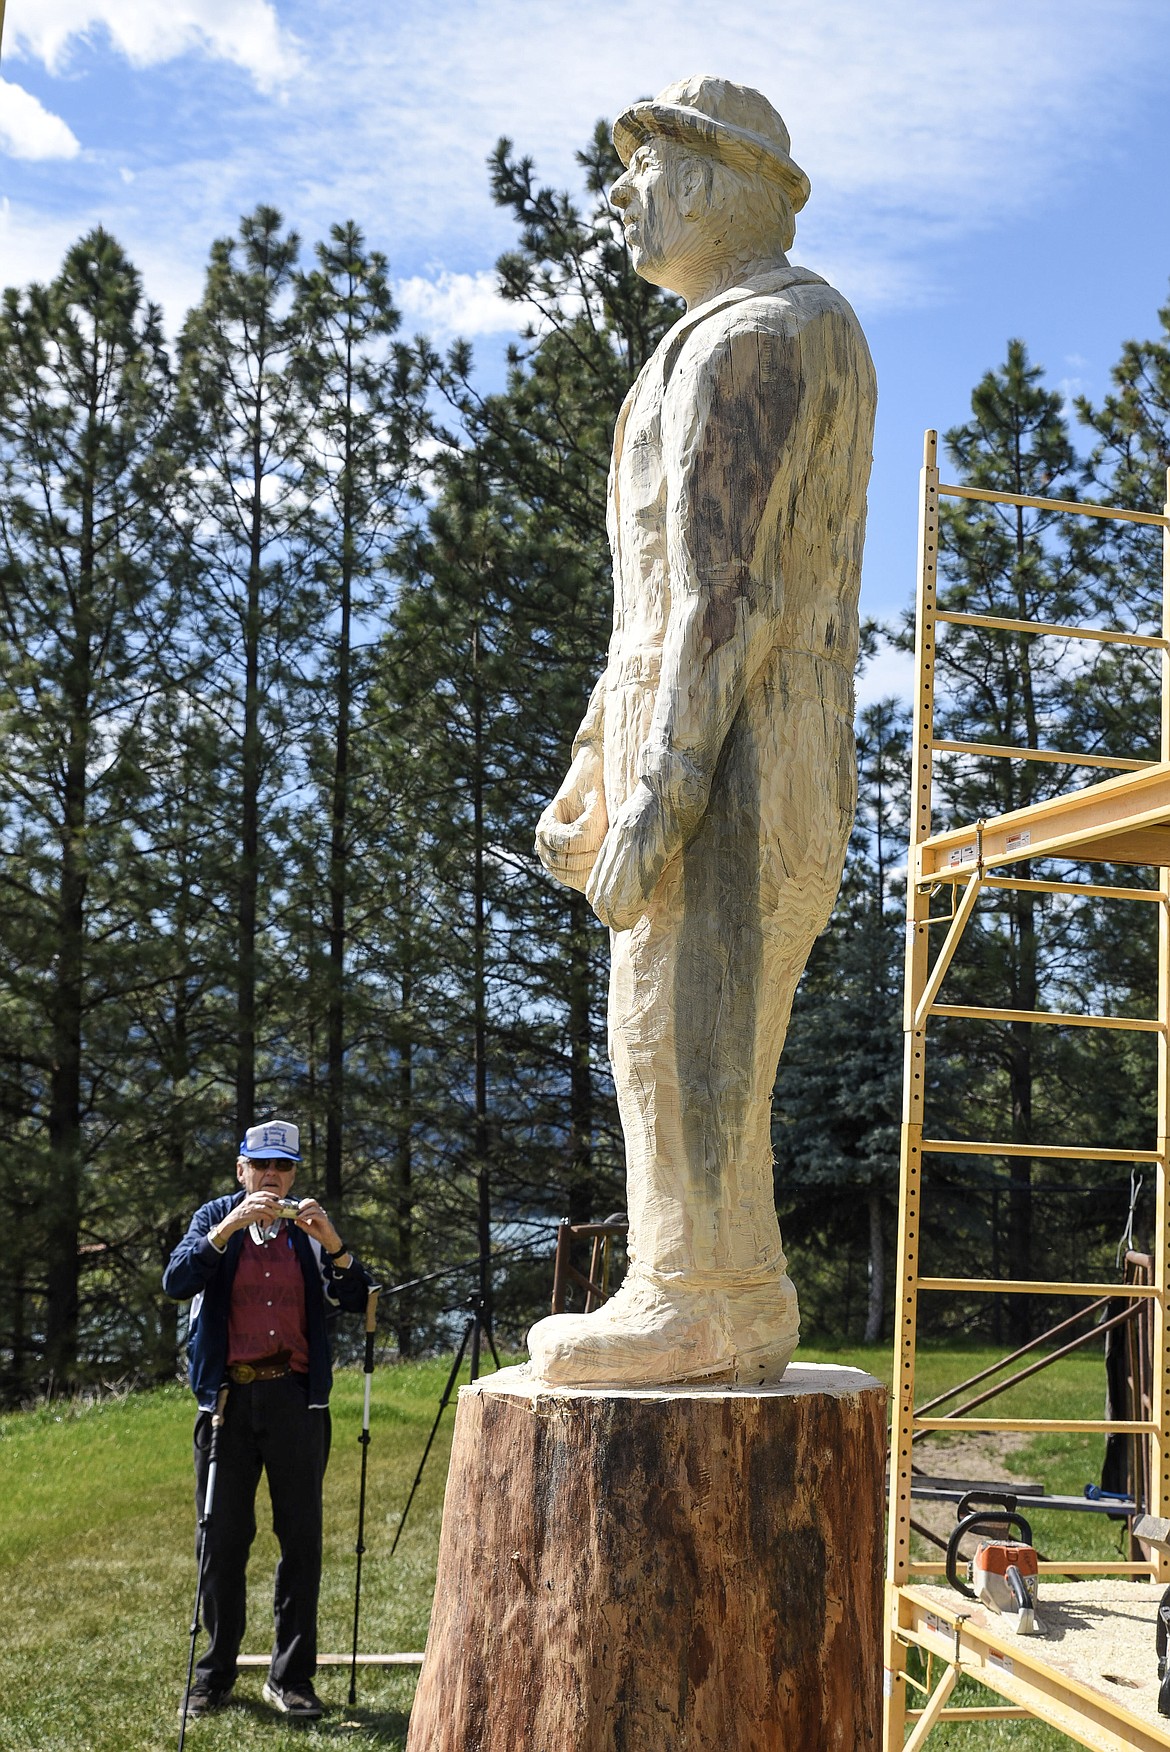 On a visit to check on progress, former forester Gene Yahvah takes a picture of the nearly-completed statue of a forester carved by local artist Ron Adamson. (Ben Kibbey/The Western News)